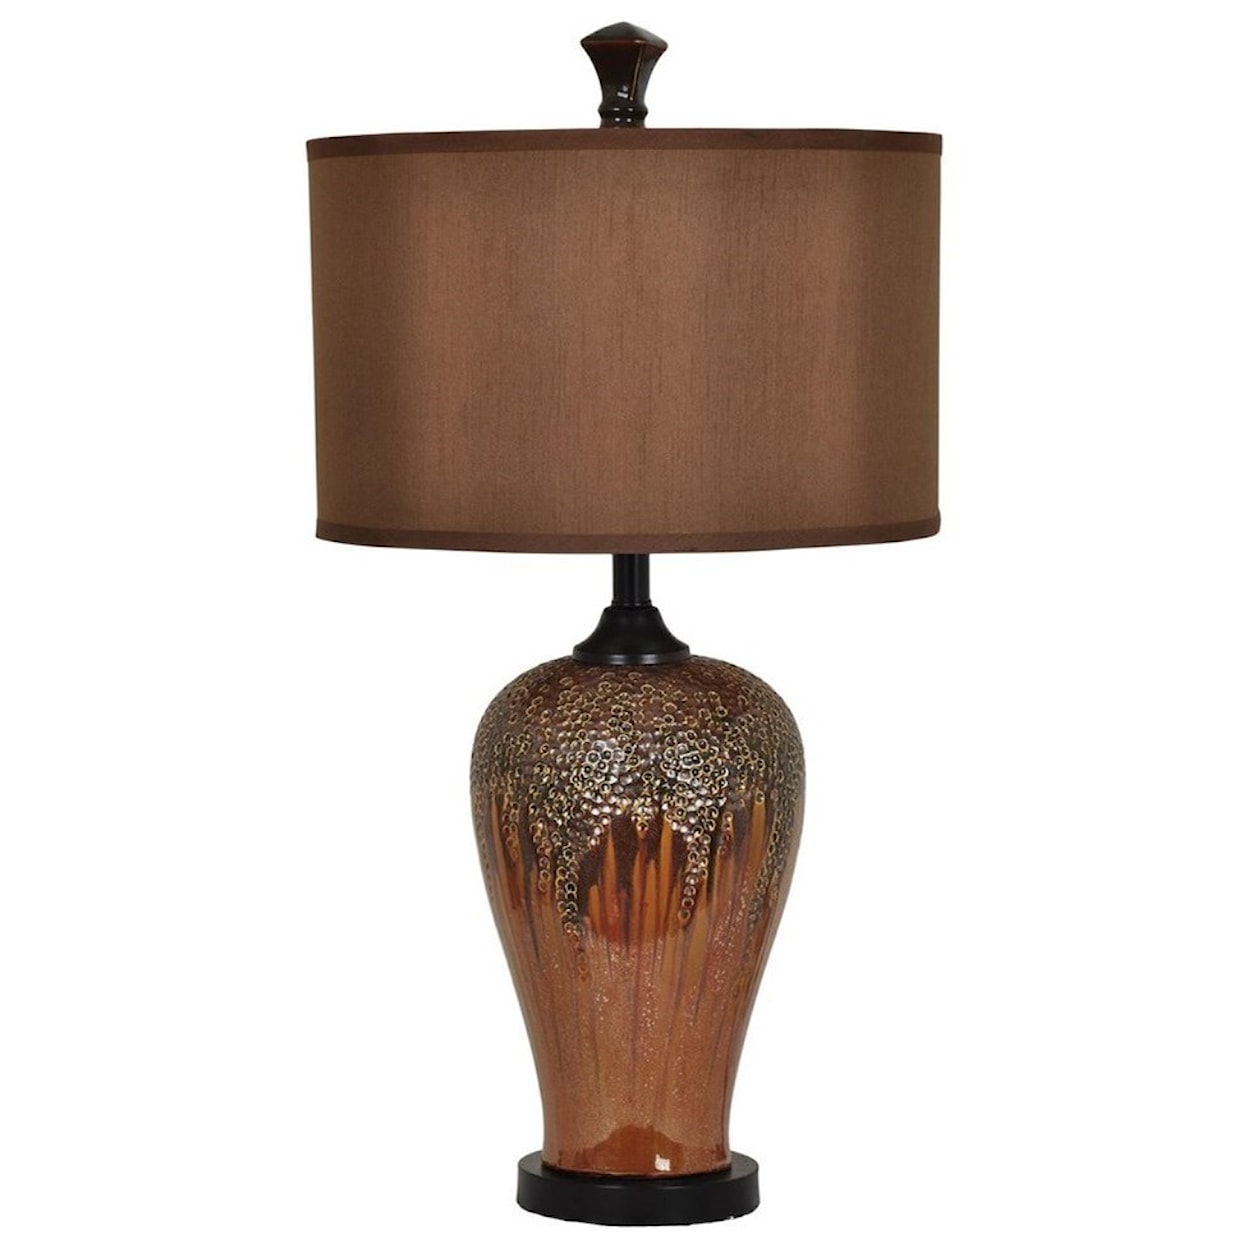 Crestview Collection Lighting Hera Table Lamp